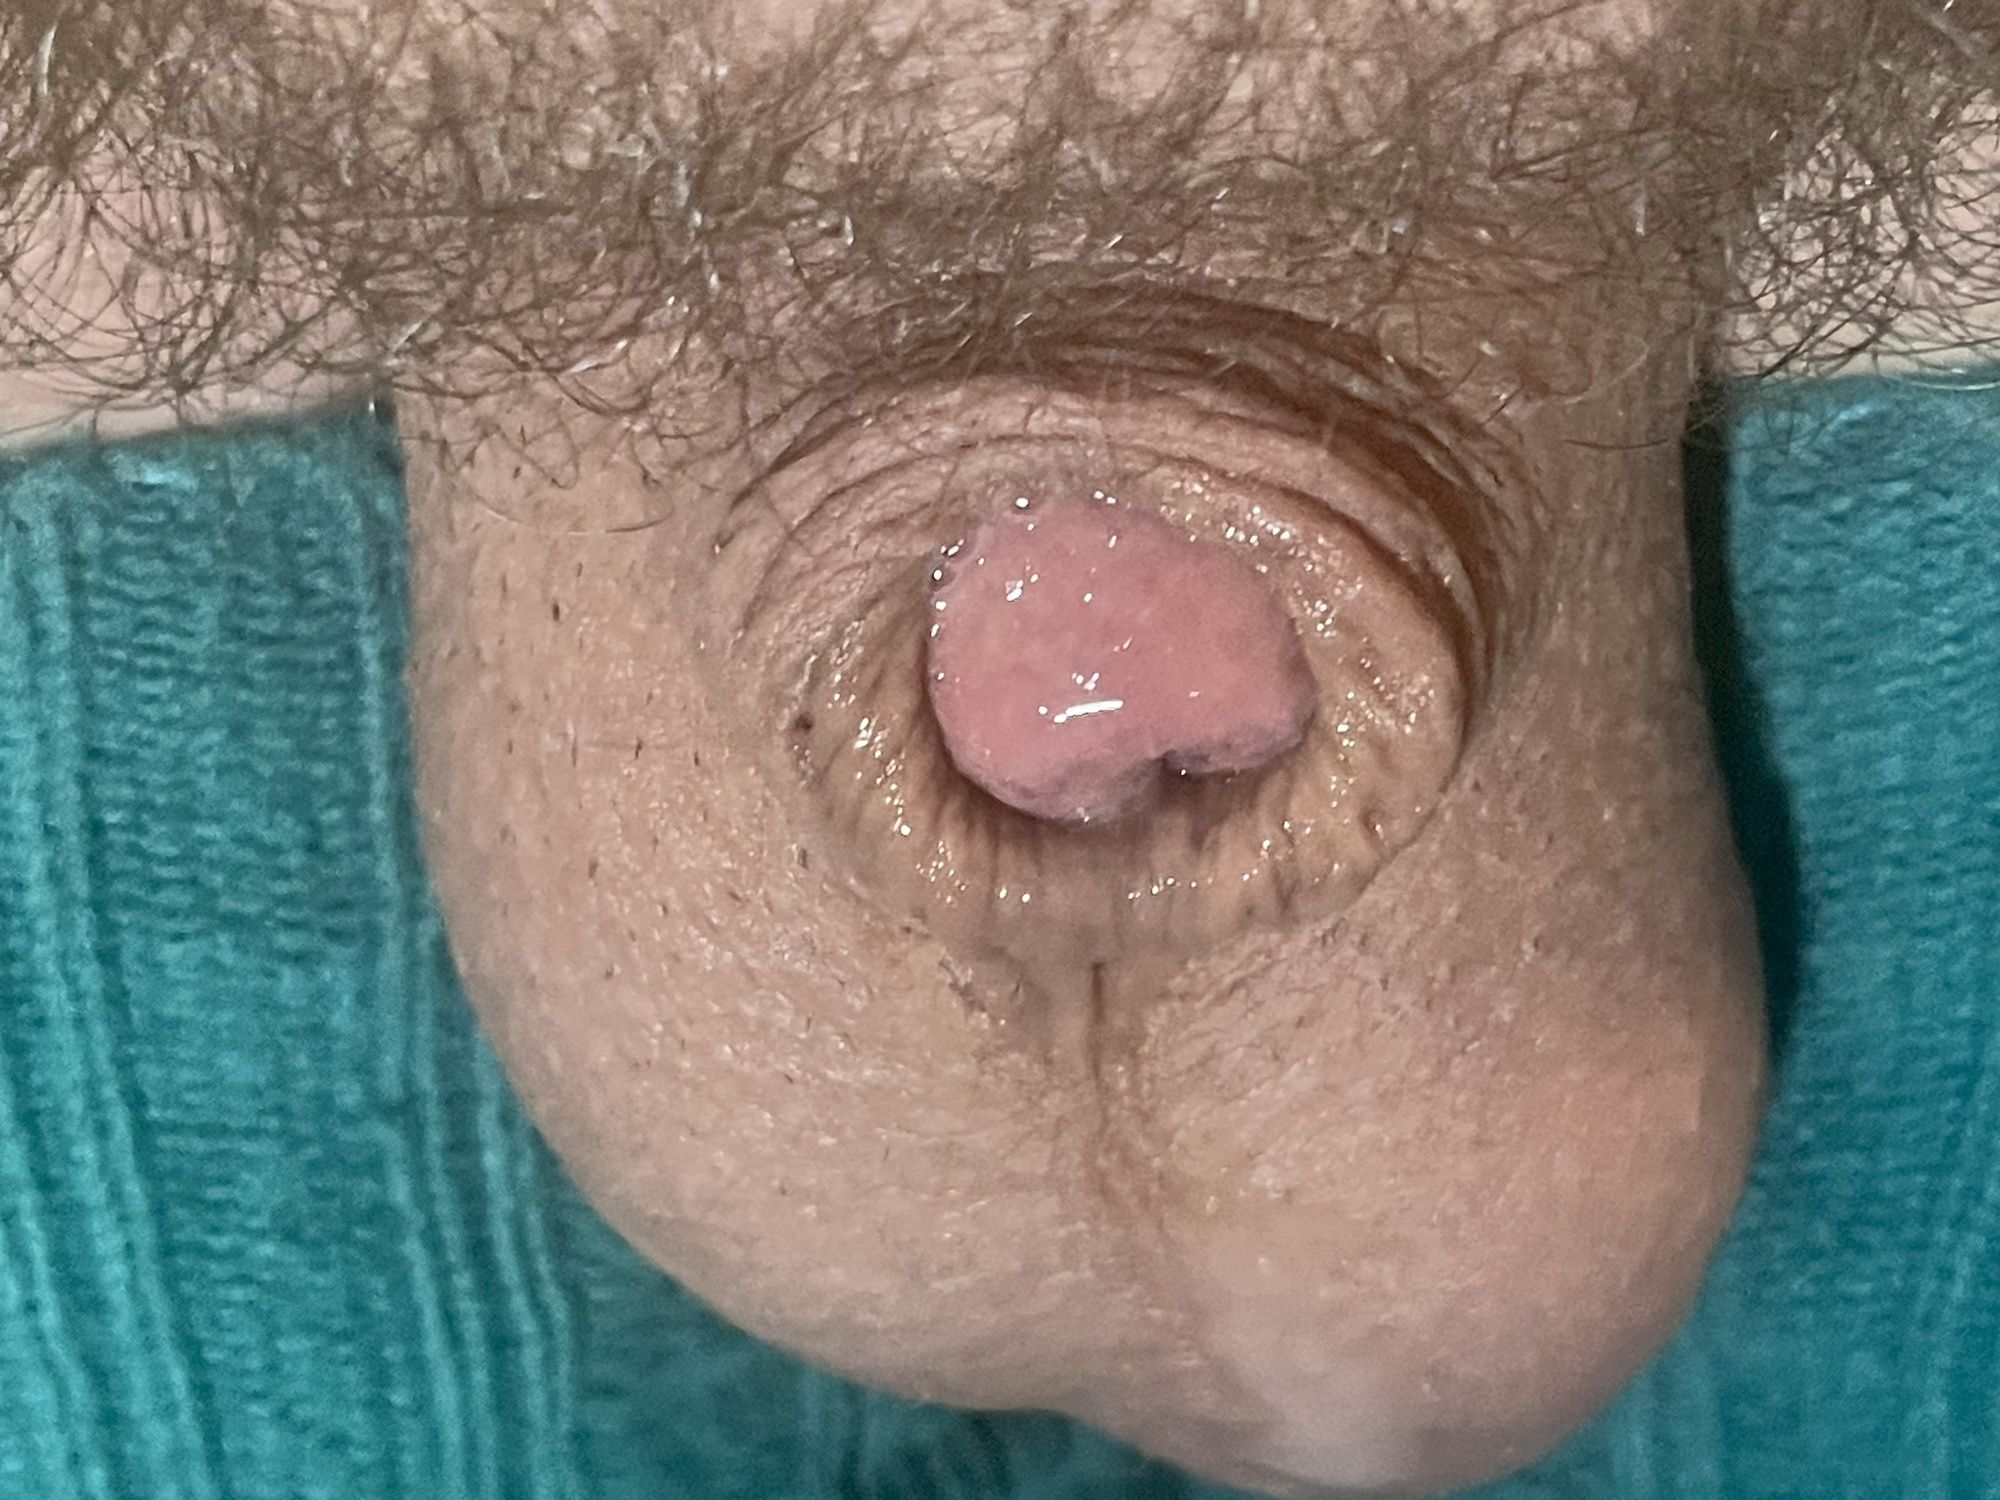 Micropenis lady, boy, cock pic